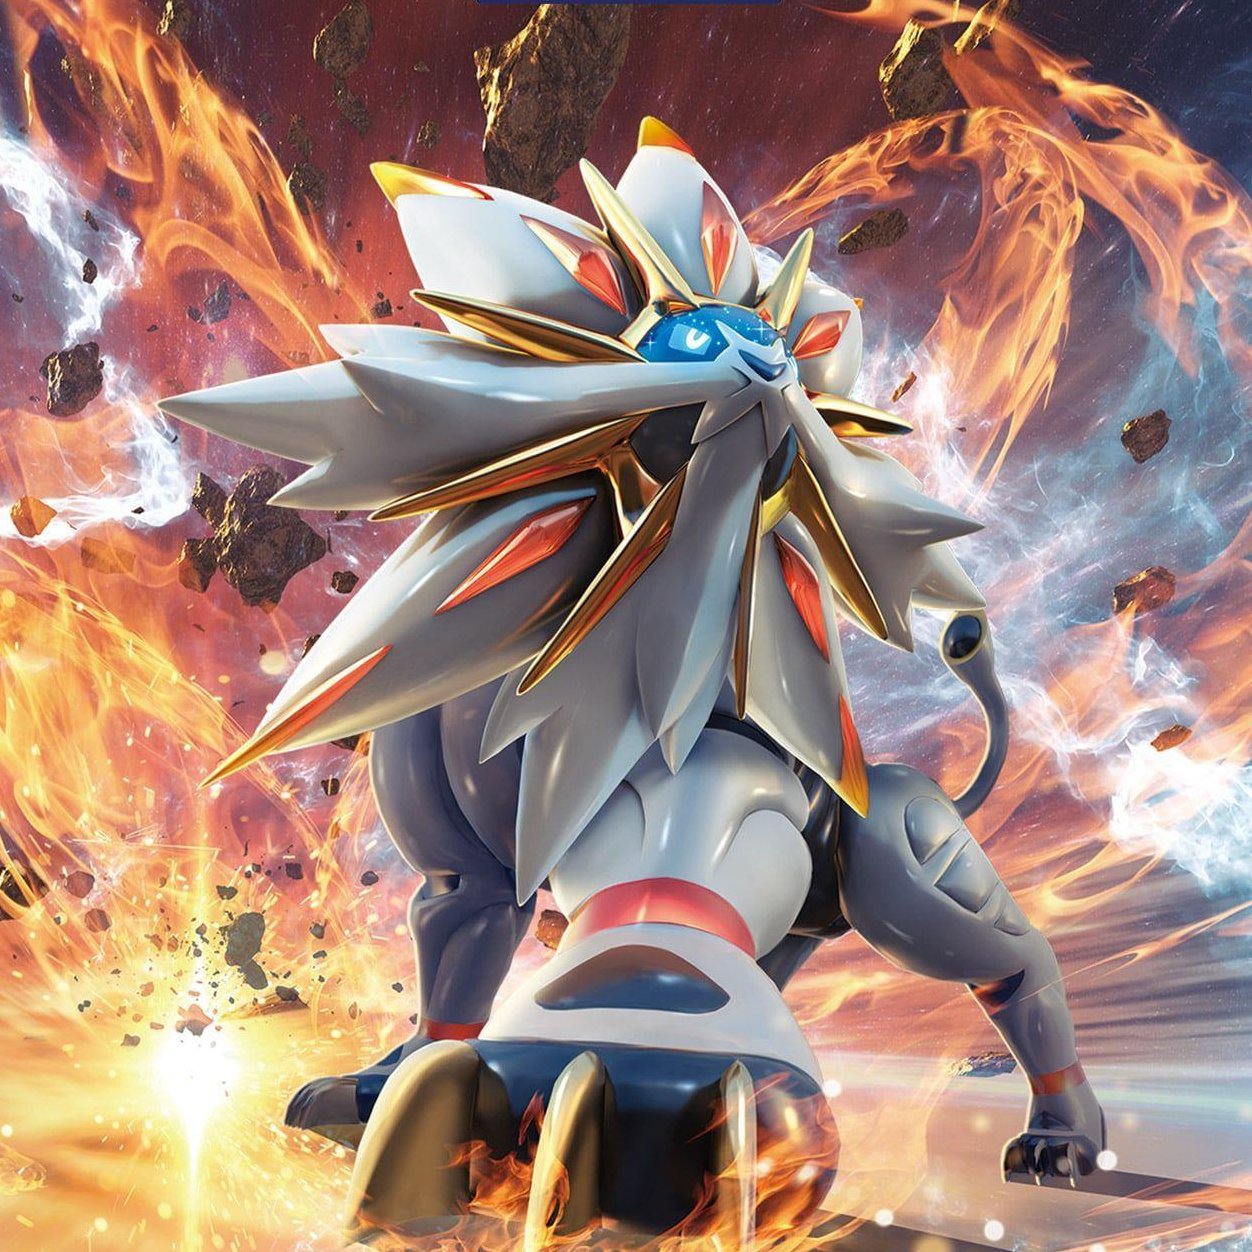 The Lore of Solgaleo and Lunala